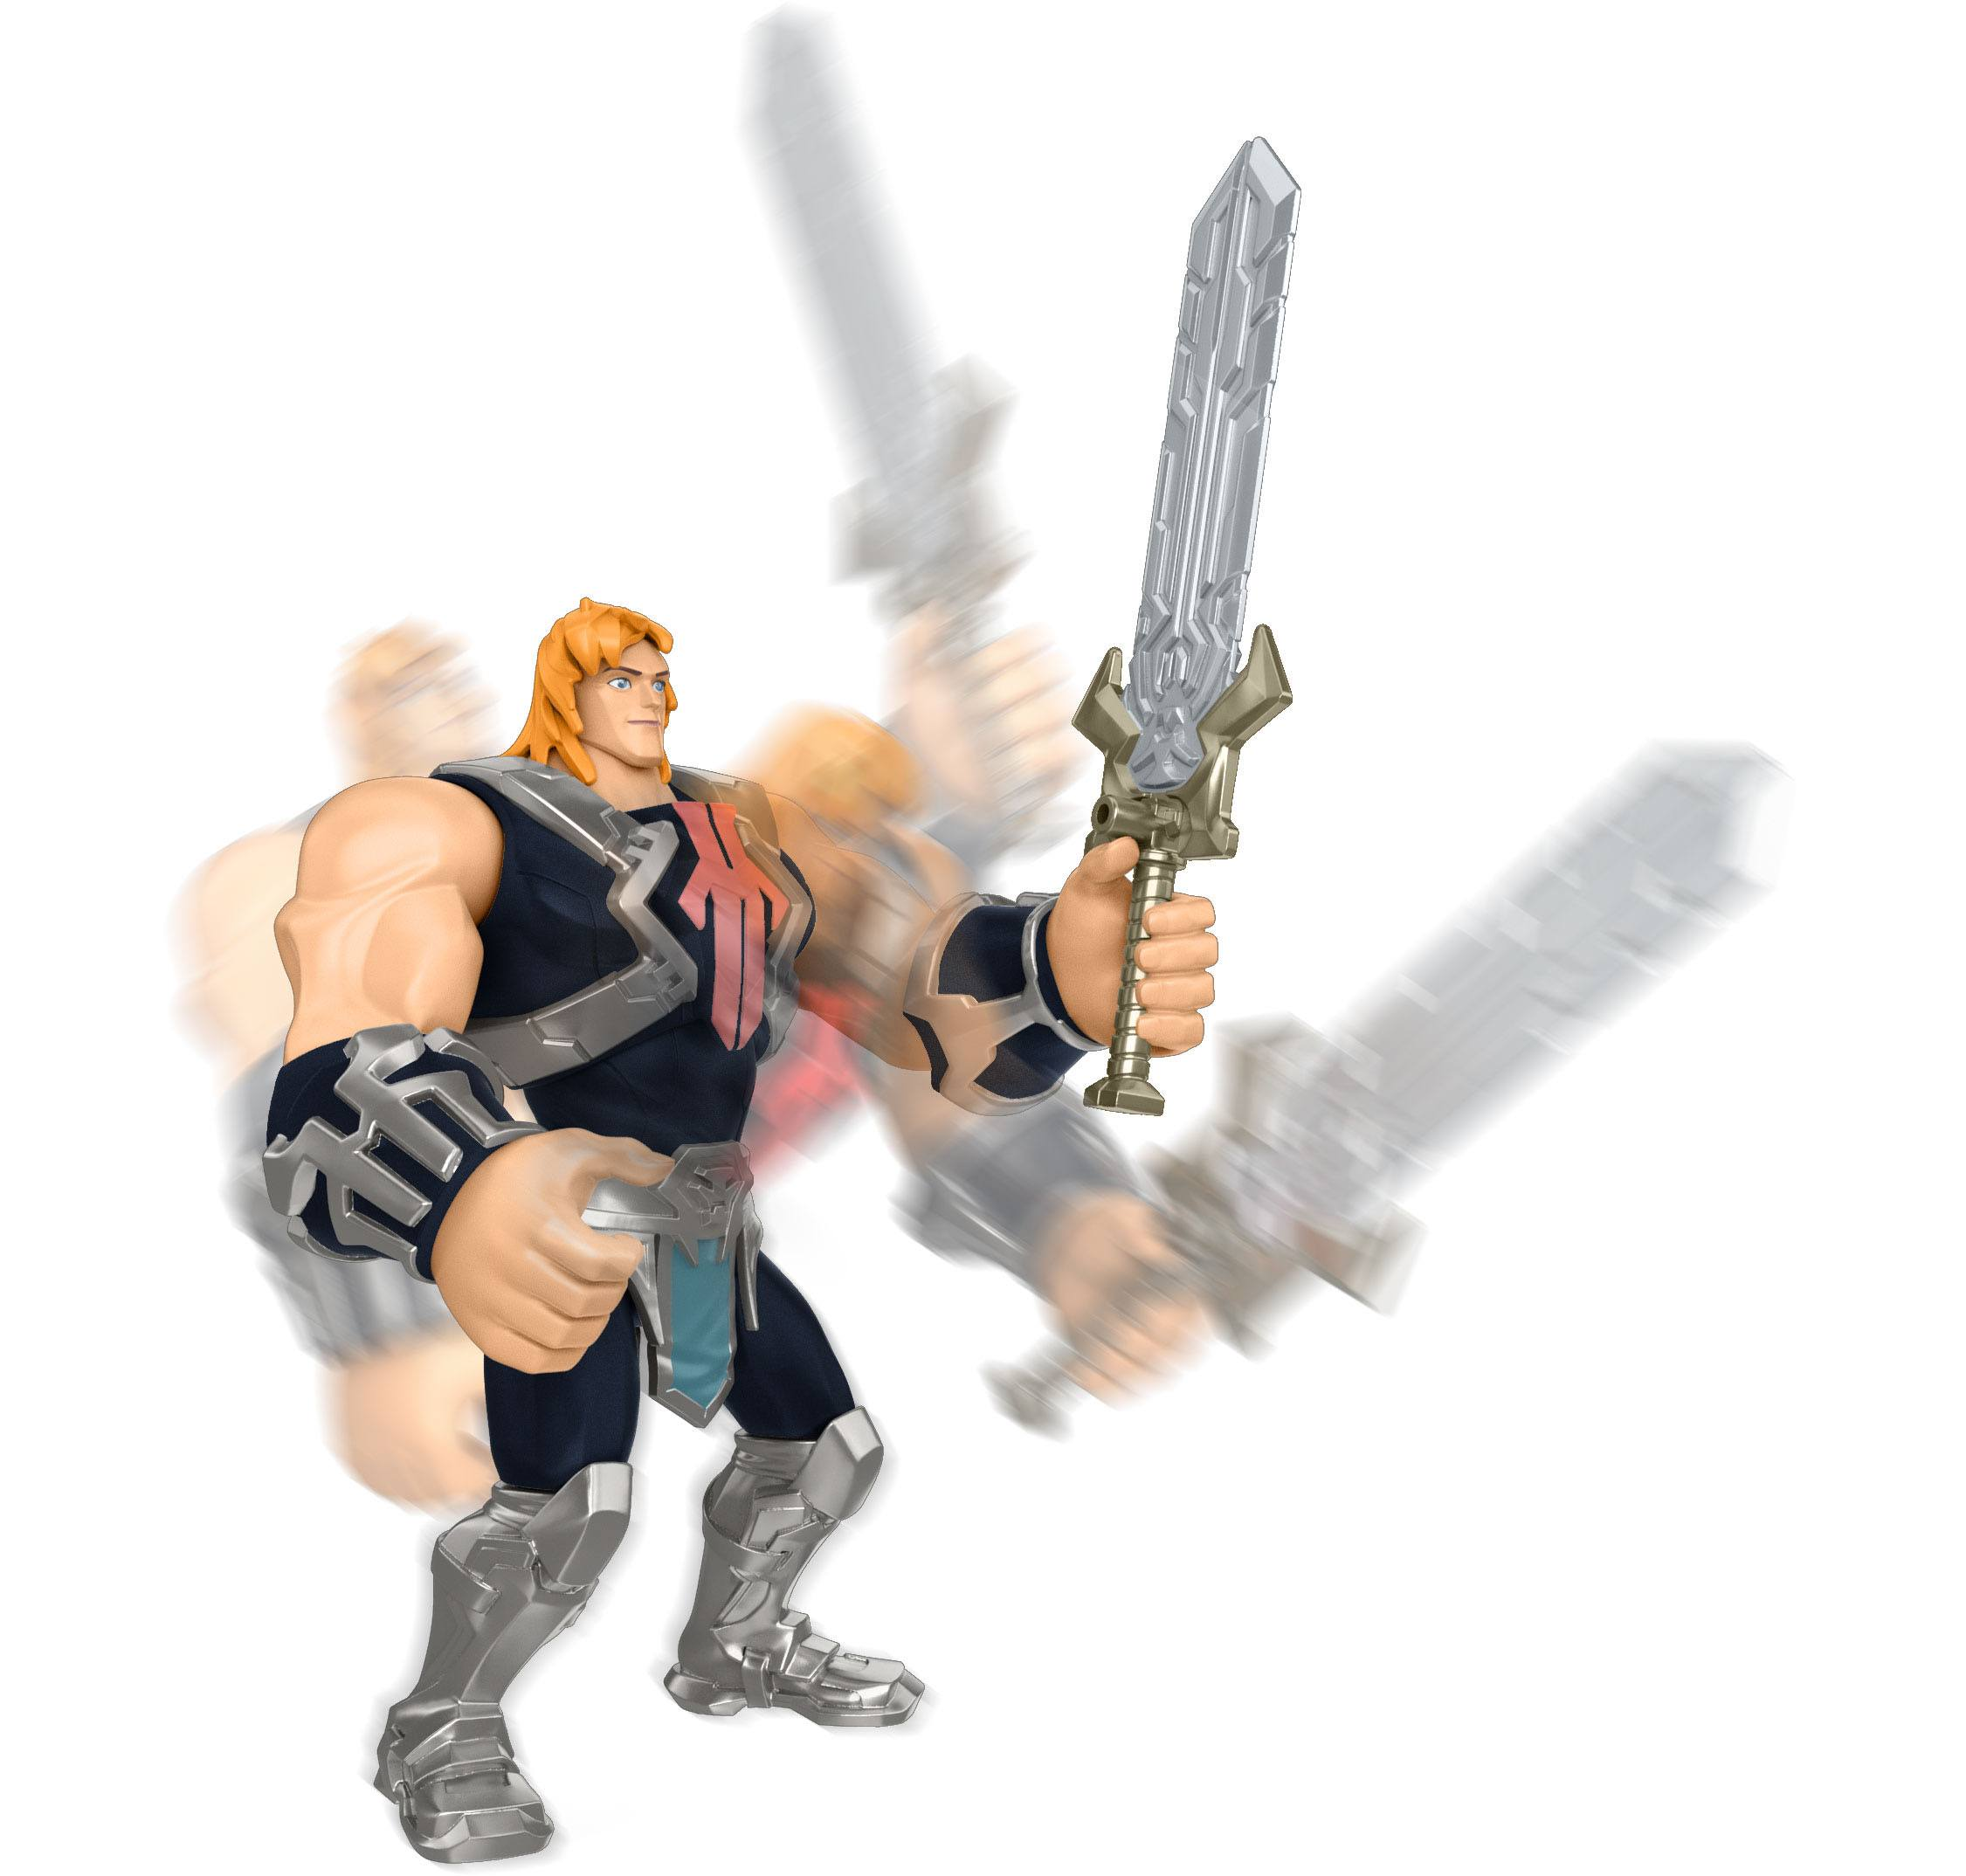 MATTEL He-Man and Action Masters The Universe He-Man cm Of Actionfigur 14 The Figur